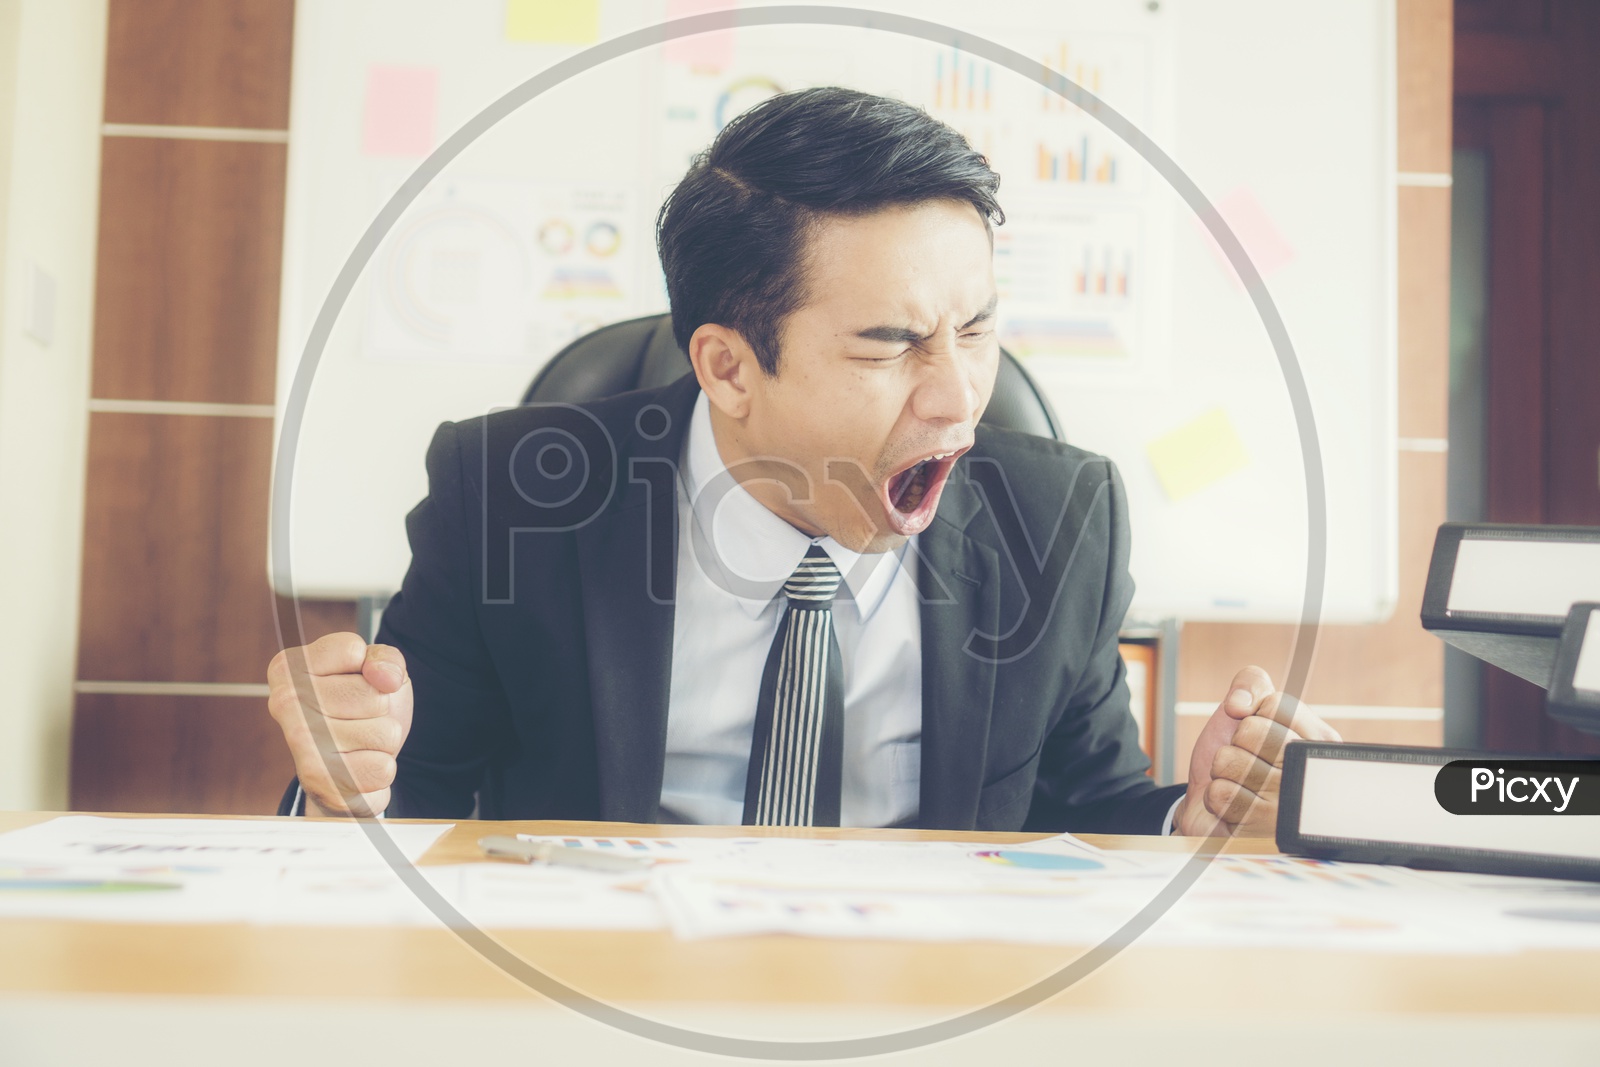 Stressed or Frustrated Business man or Employee At Office Work Scape